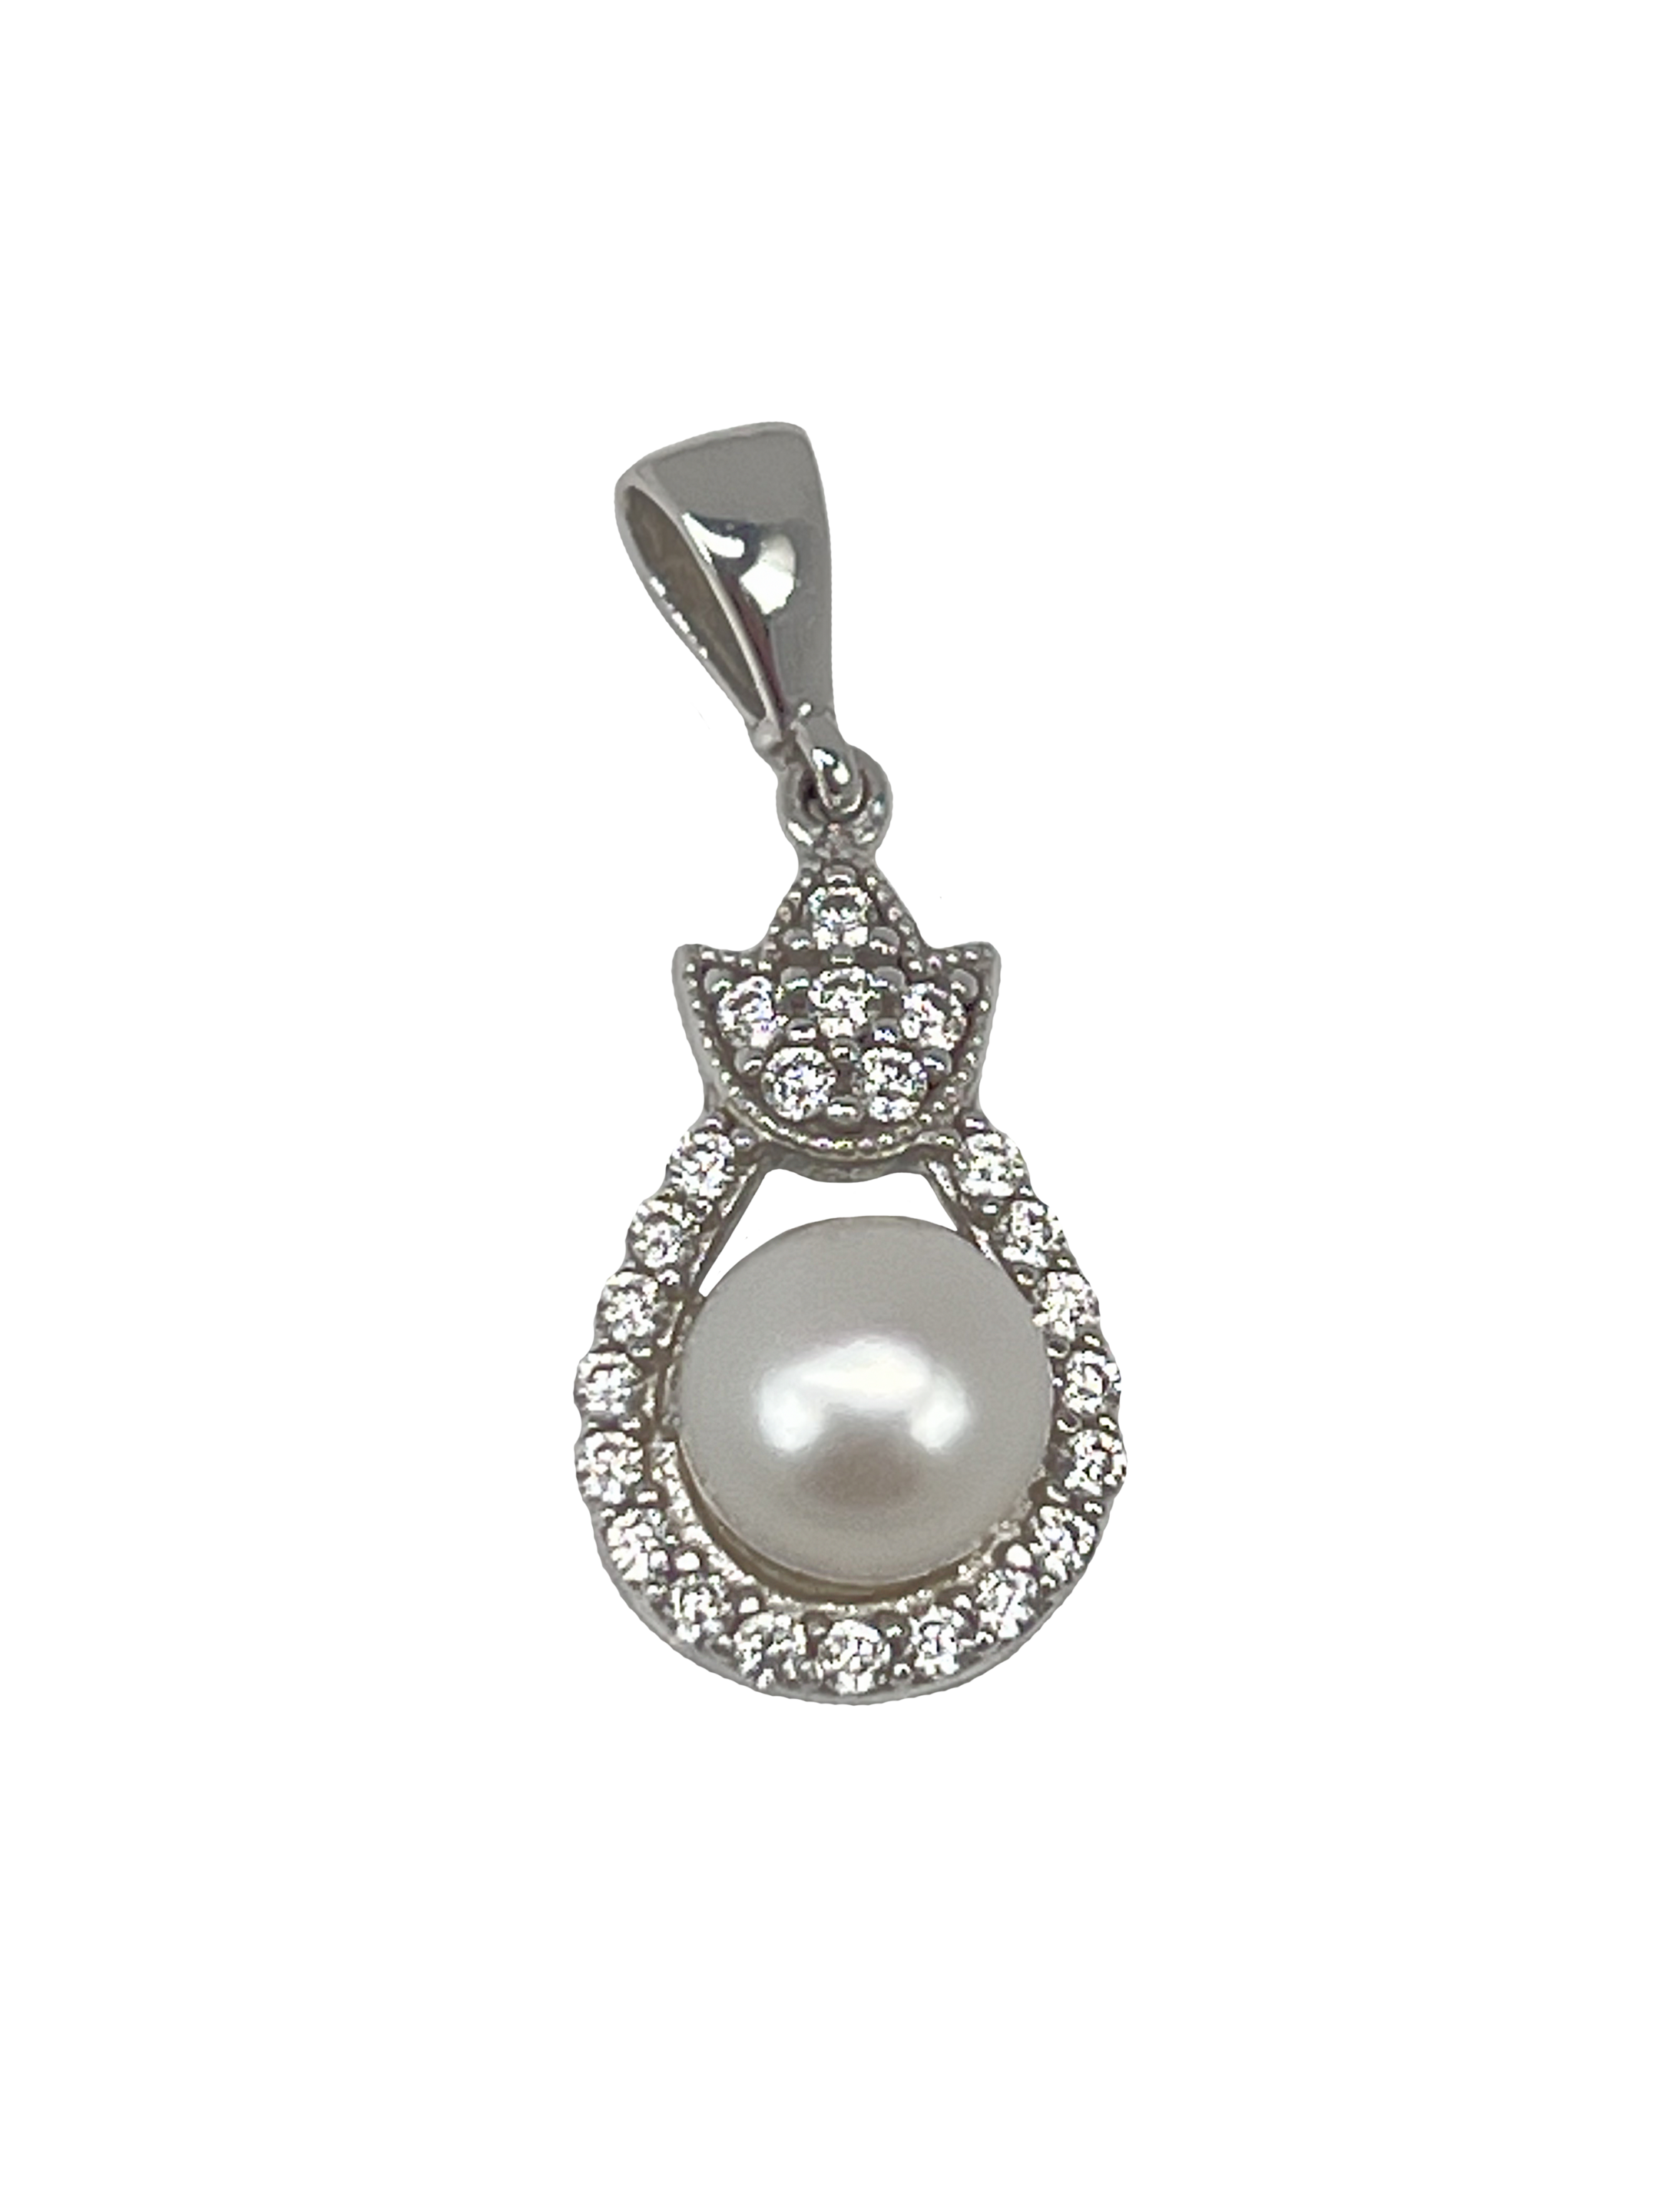 Golden pendant made of white gold with a pearl and zircons